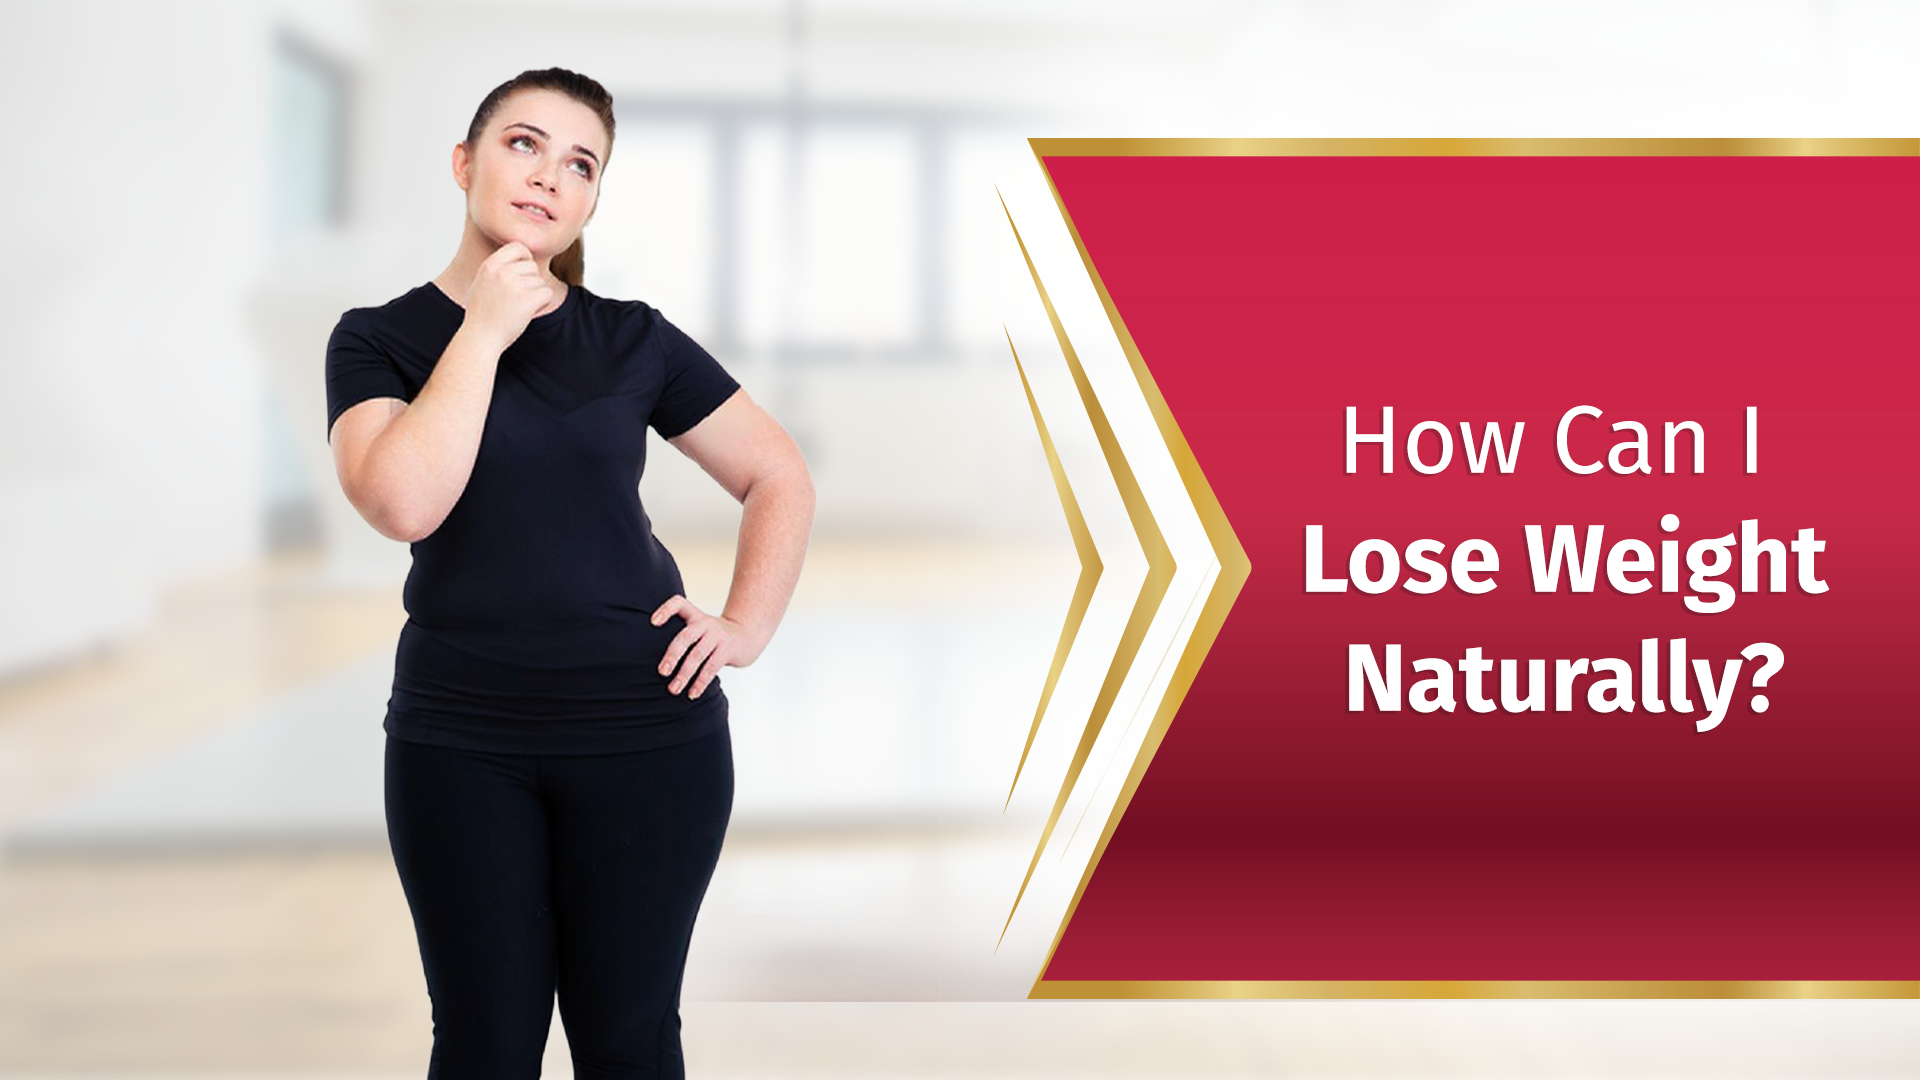 How can I lose weight naturally?